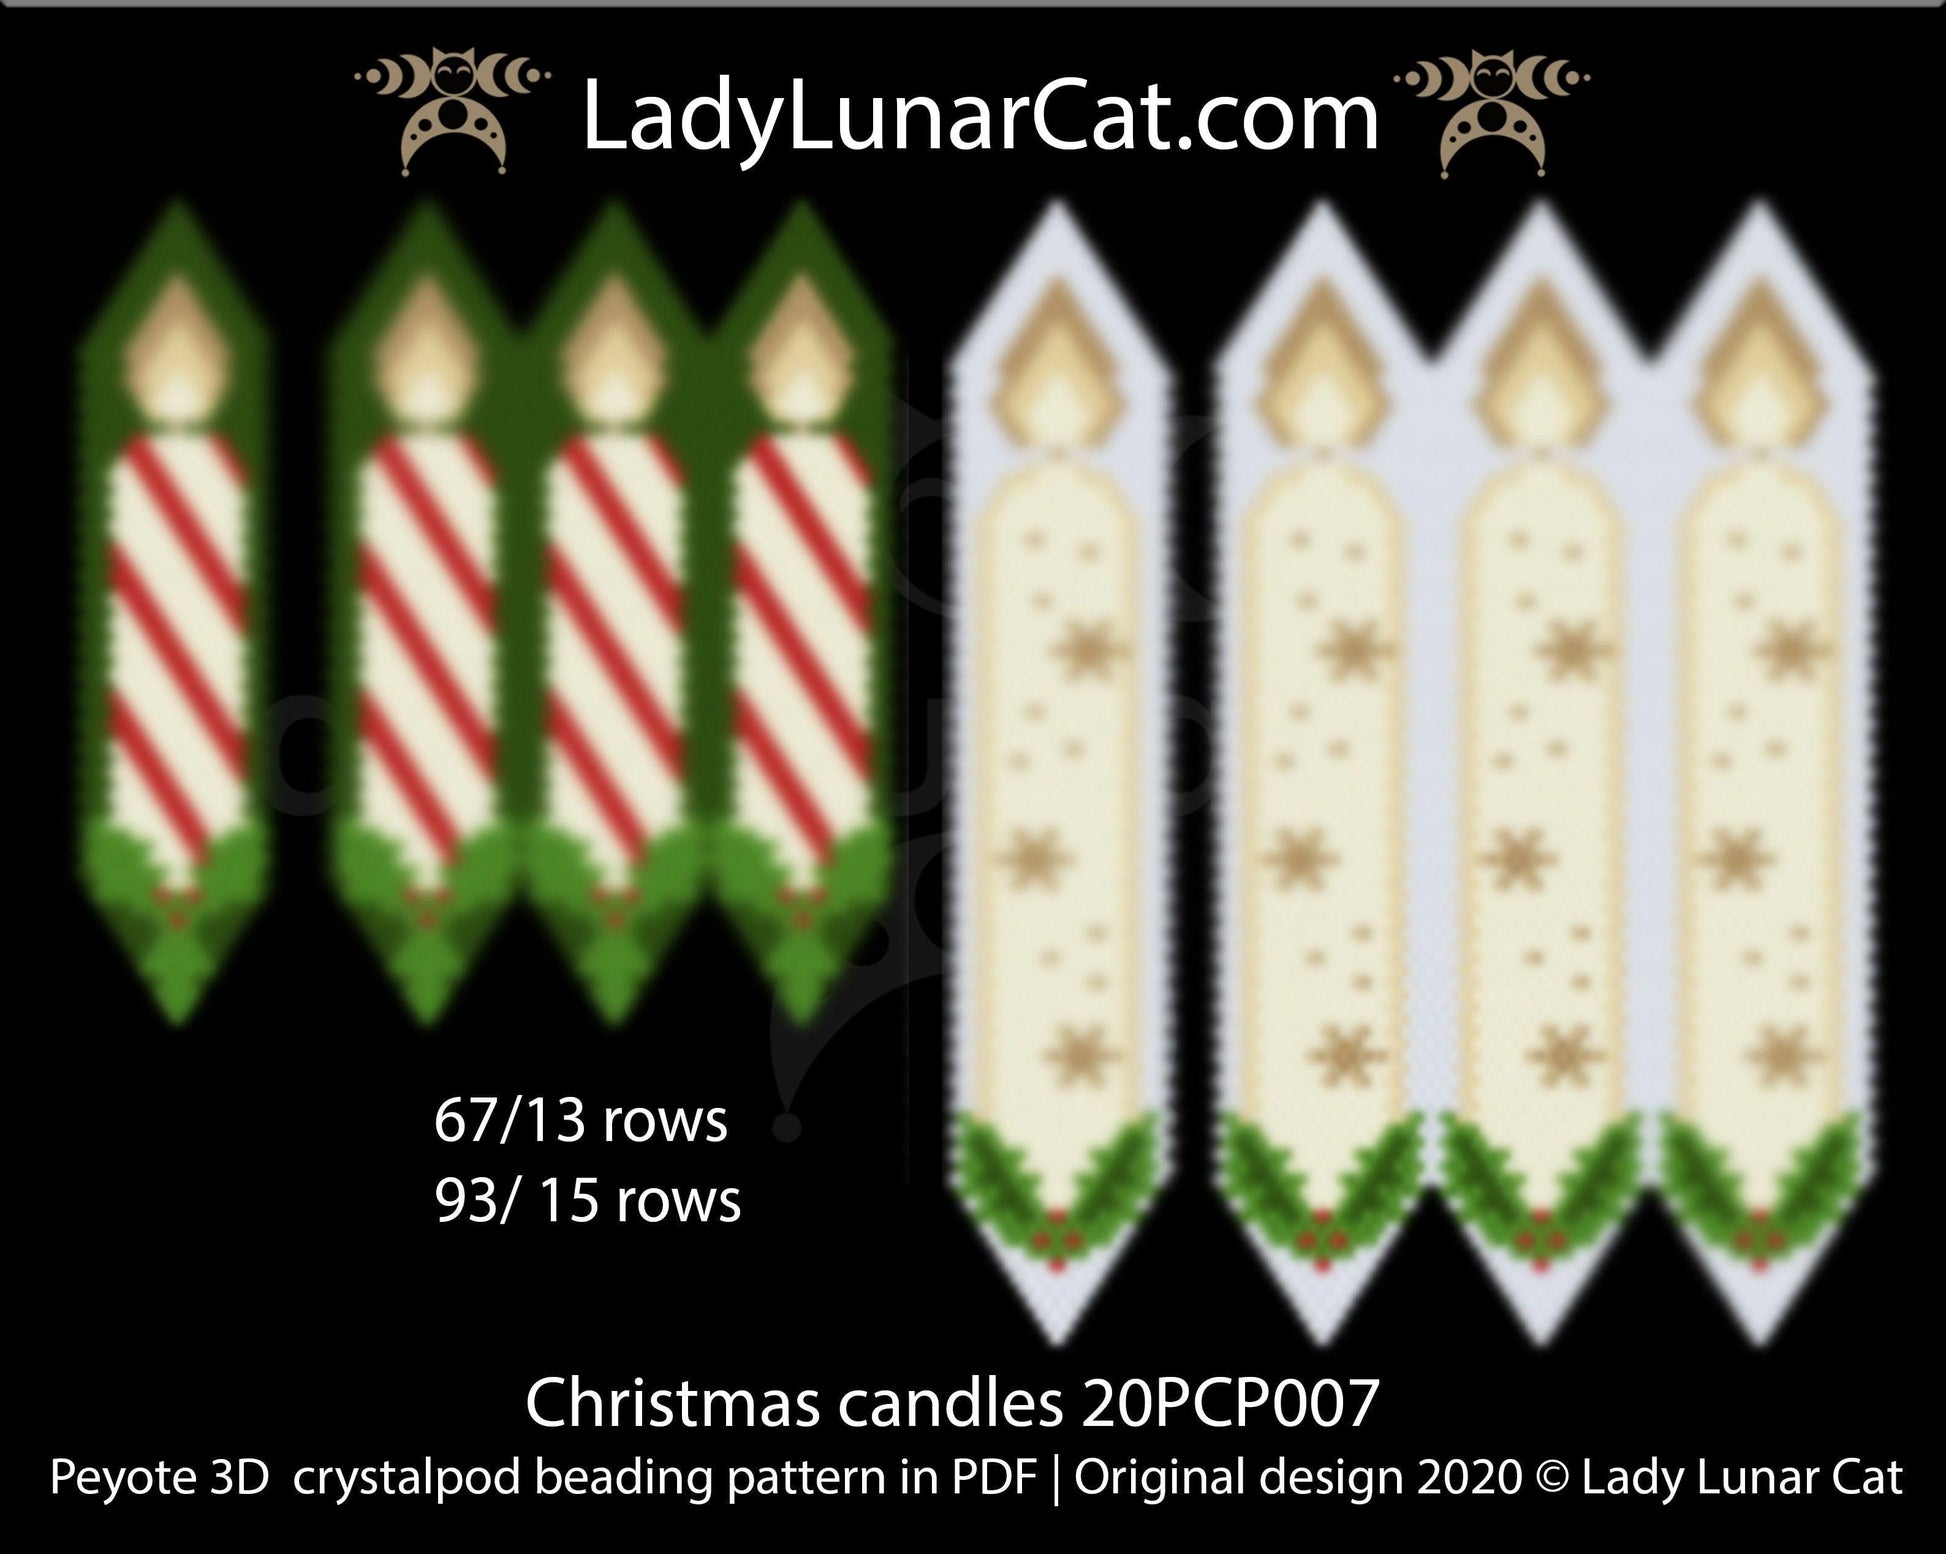 3d peyote pod pattern or crystalpod pattern for beading Christmas candles  20PCP007 LadyLunarCat